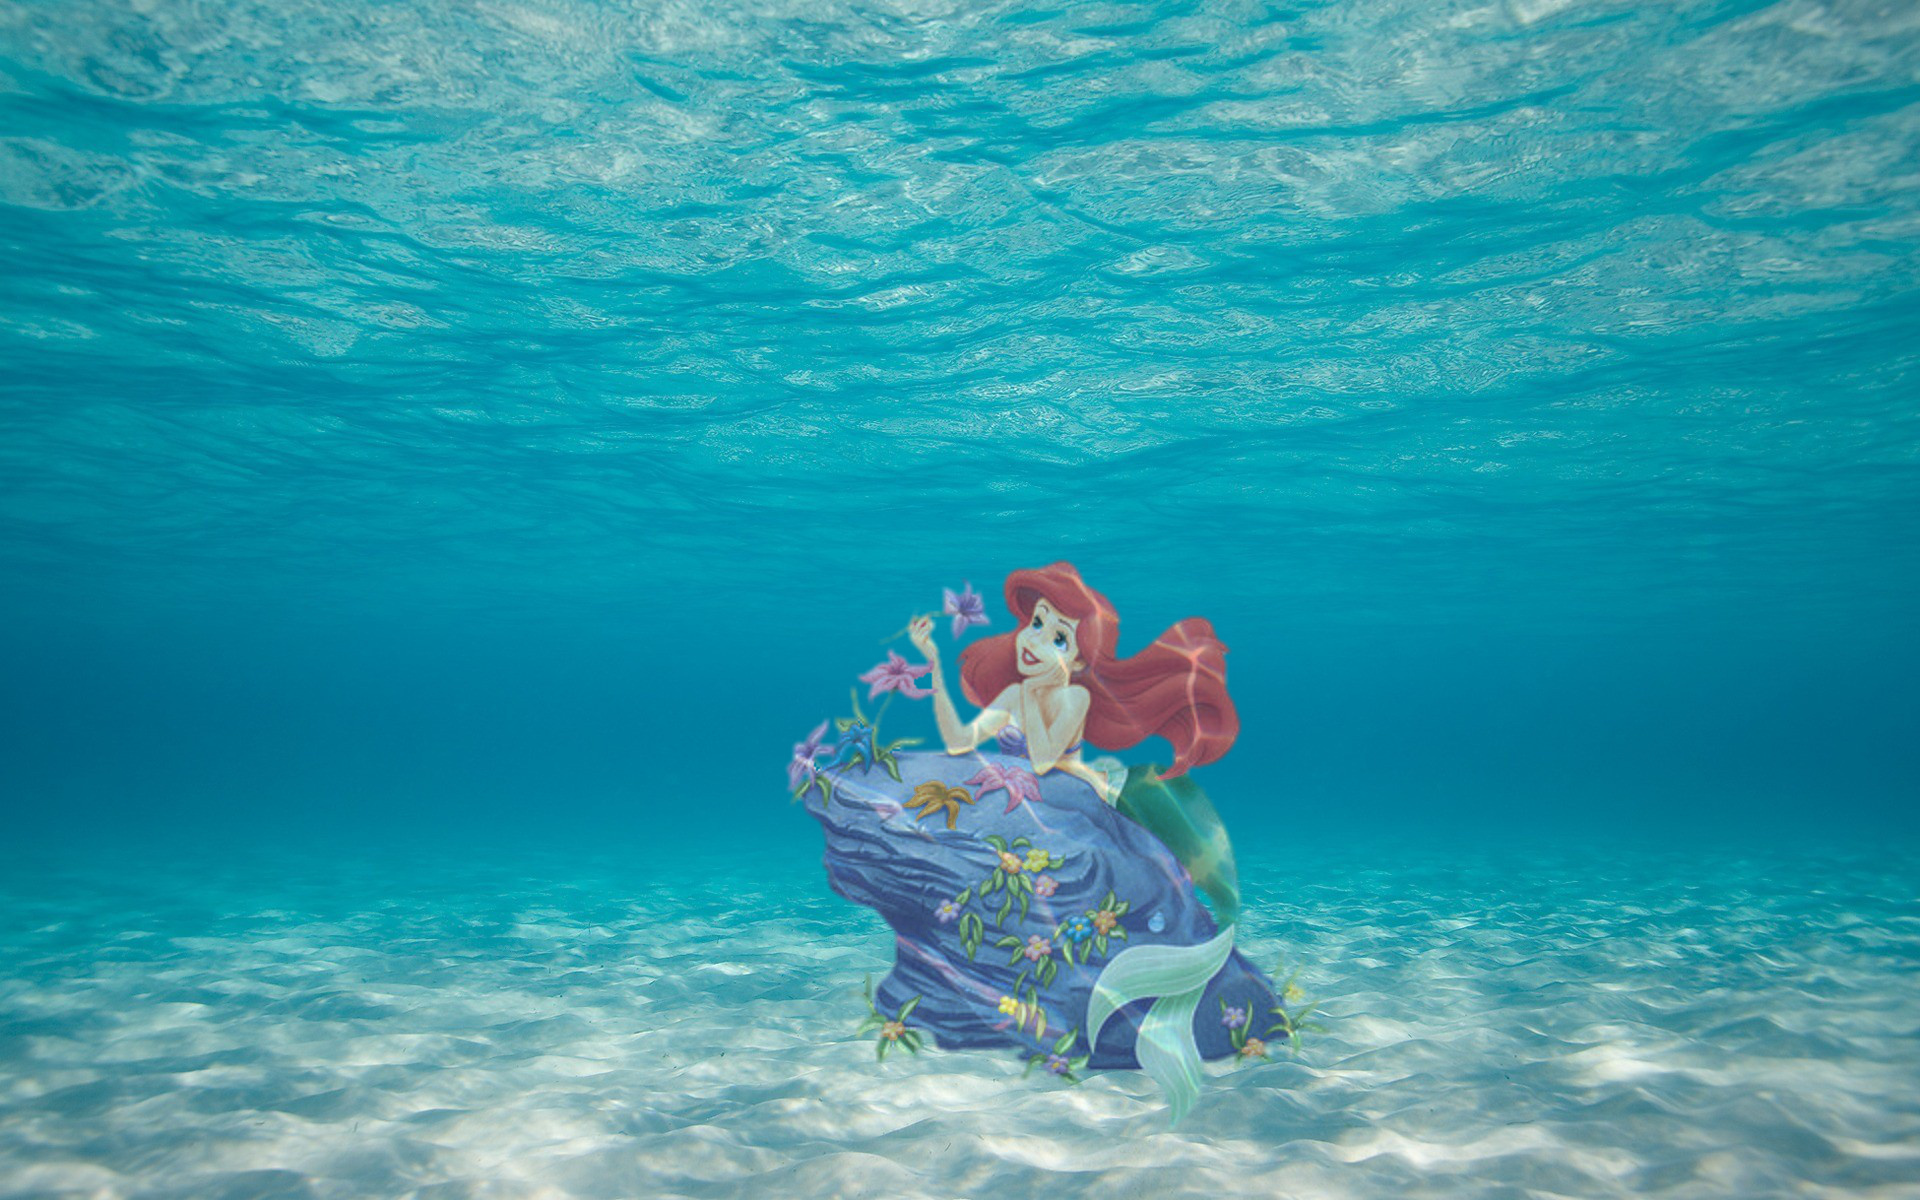 Little Mermaid Desktop Theme Pictures To Pin